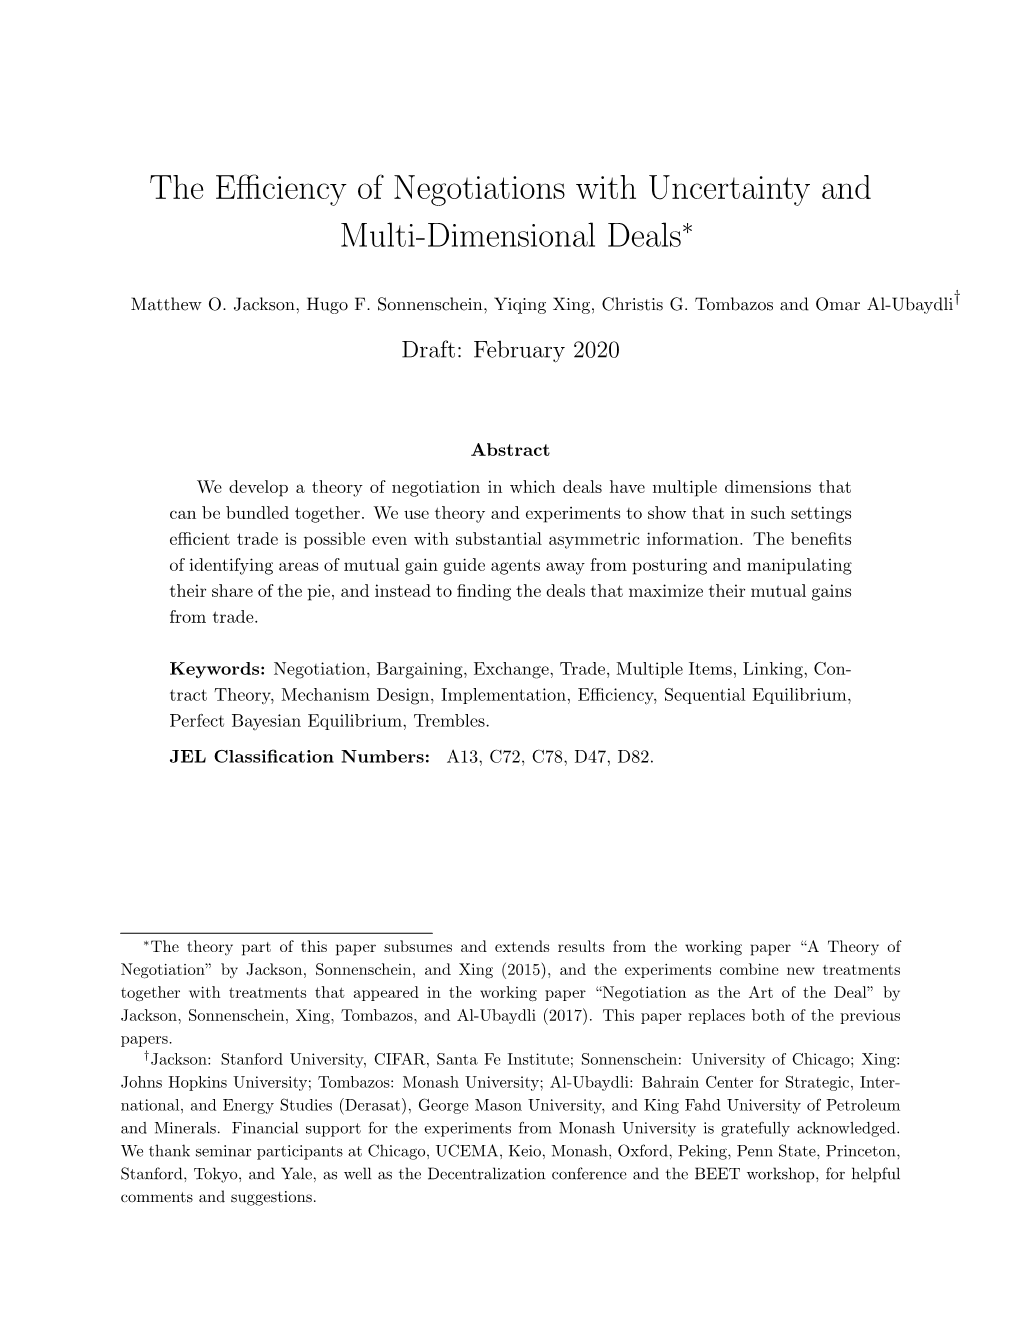 The Efficiency of Negotiations with Uncertainty and Multi-Dimensional Deals